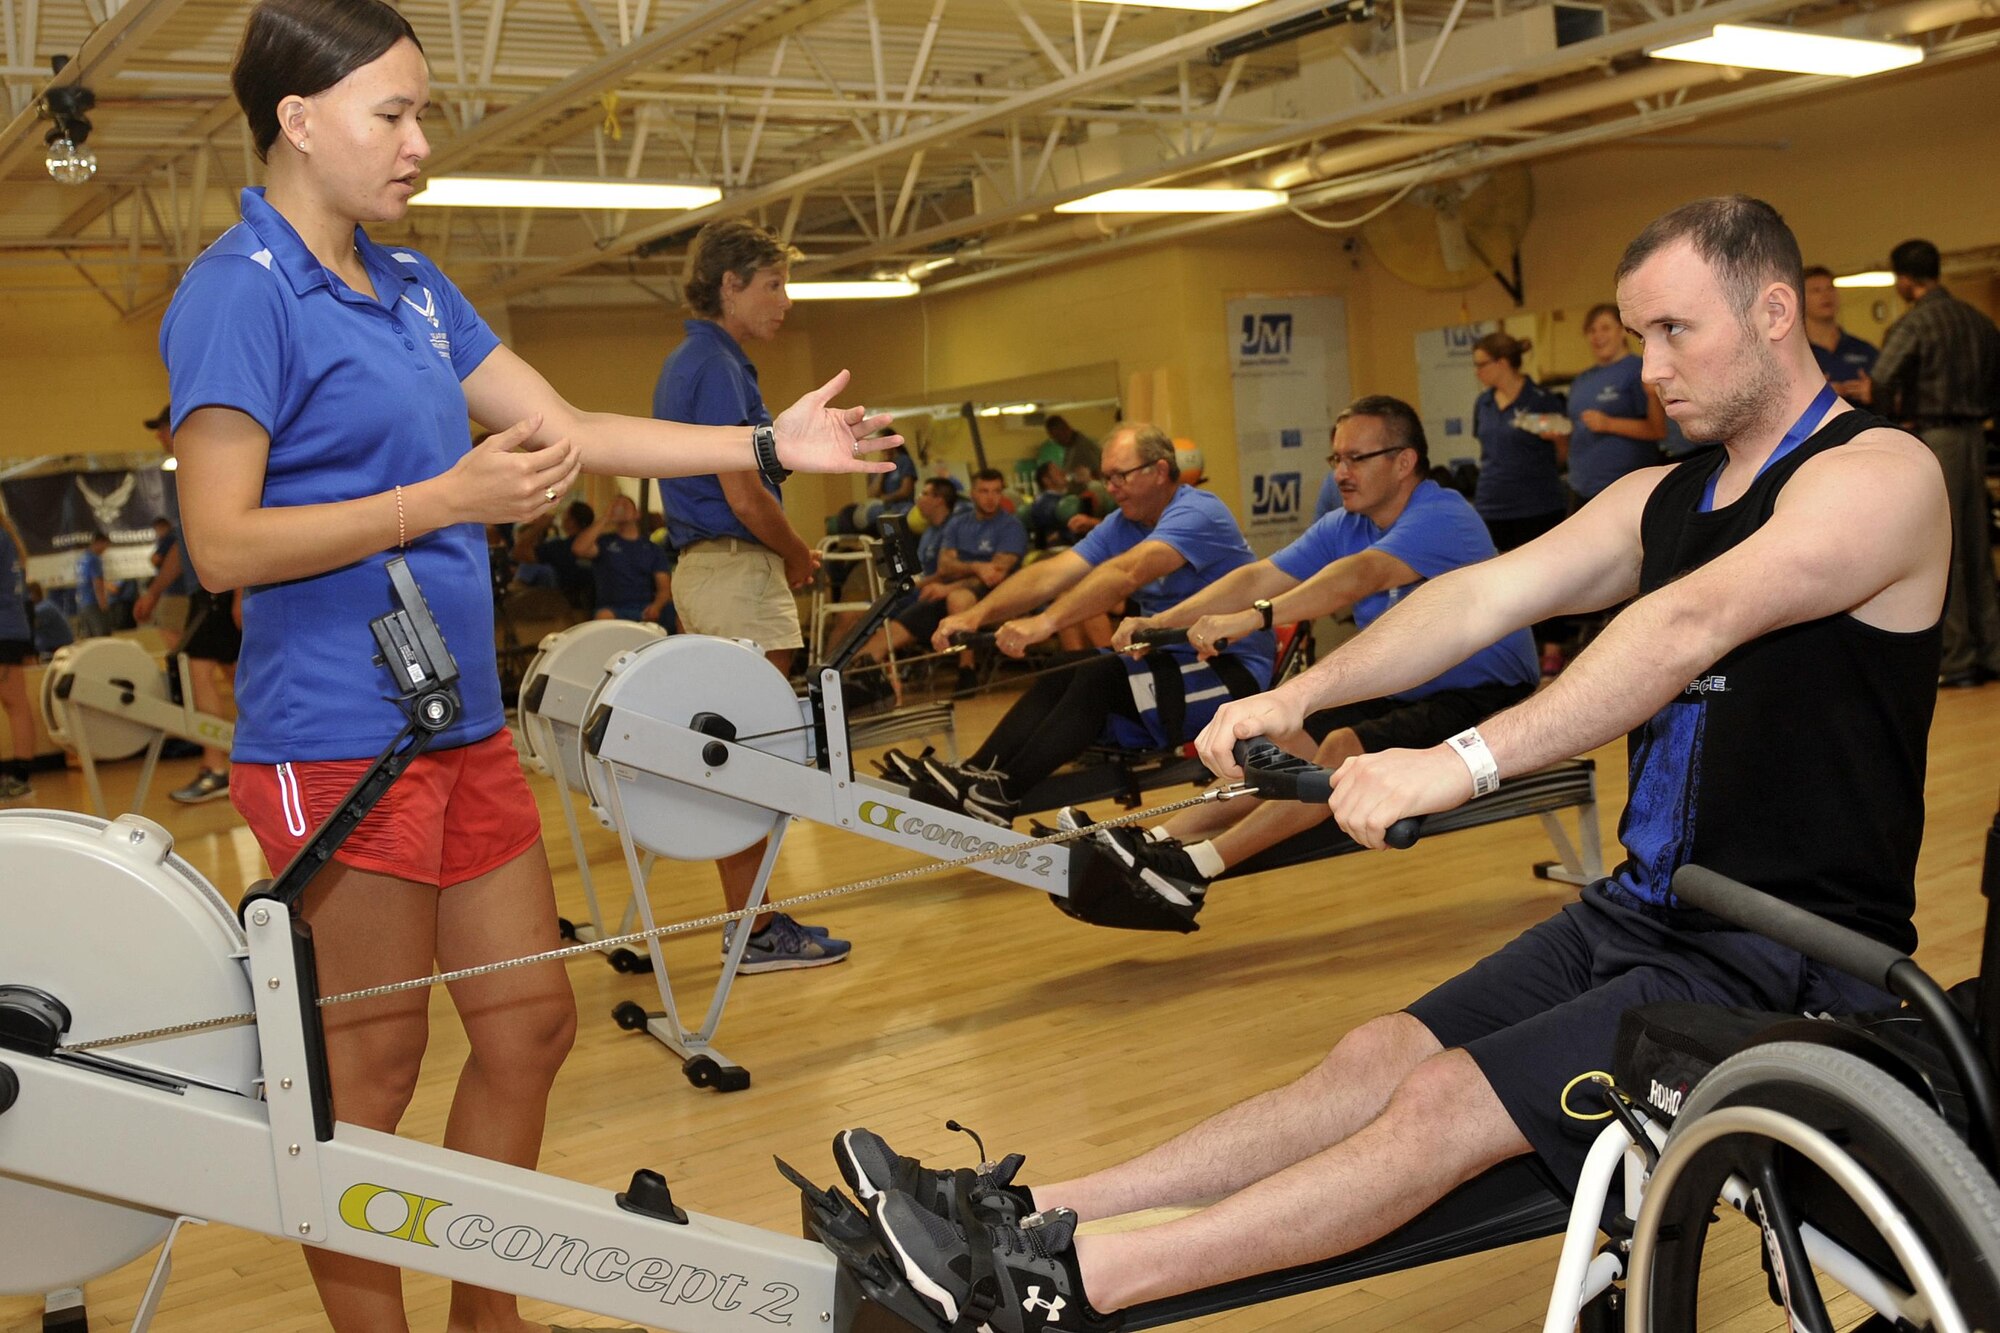 U.S. Air Force Senior Airman Scott Brown follows close instruction from Coach Katy Milton during the rowing exercise. Wounded warriors members from across the country participated in a special camp focused on recovery. More than 120 participated in hopes to aid with their healing process with events like archery, swimming, basketball and more at Offutt Air Force Base, Nebraska, Sept. 17 - 23. (U.S. Air Force photo by Jeff W. Gates)